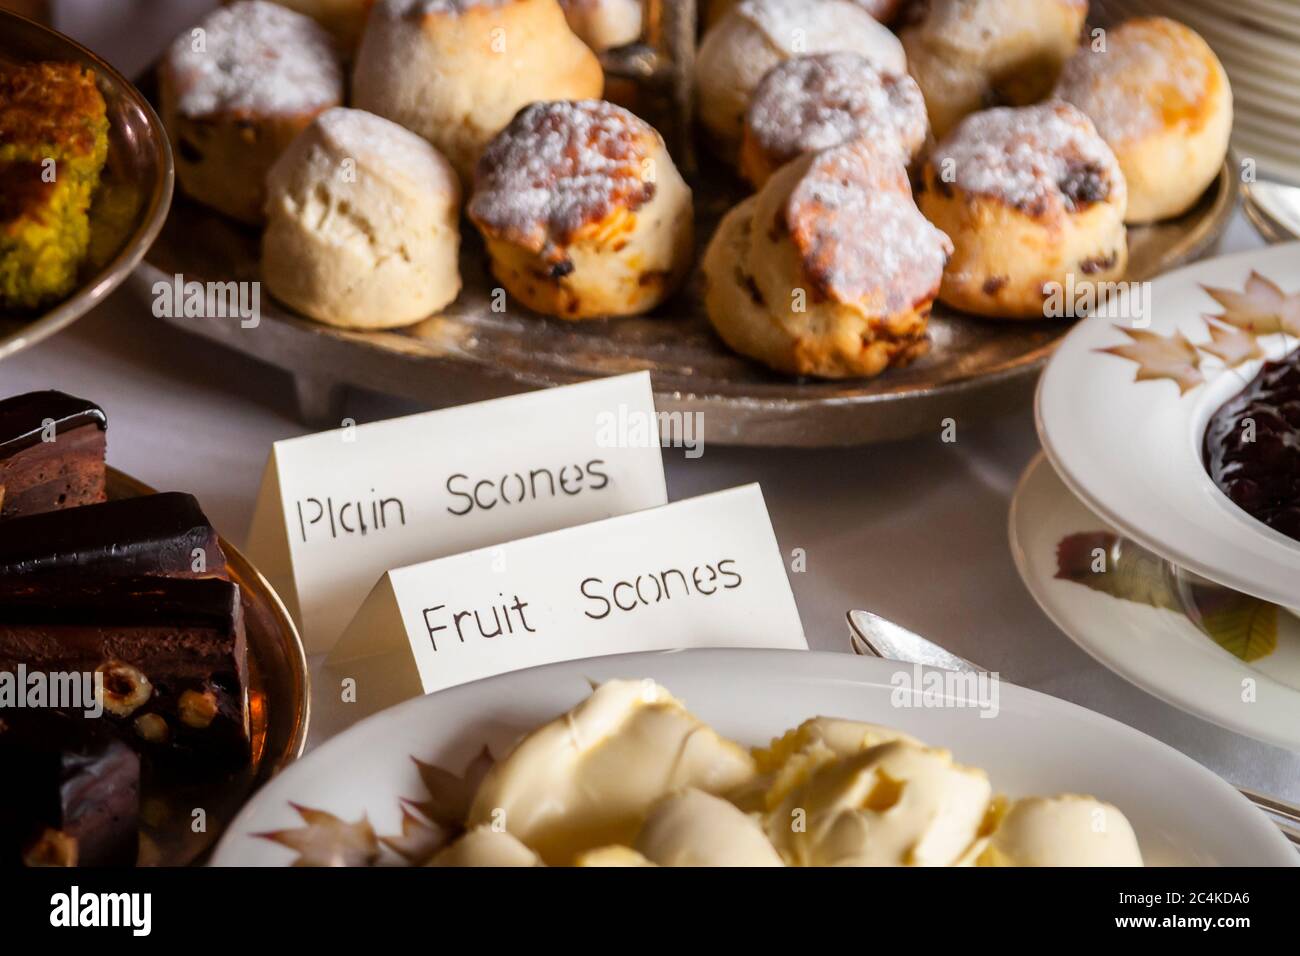 Scones, which are bursting with baking powder and stuck to the palate. Endsleigh Hotel in West Devon, England Stock Photo